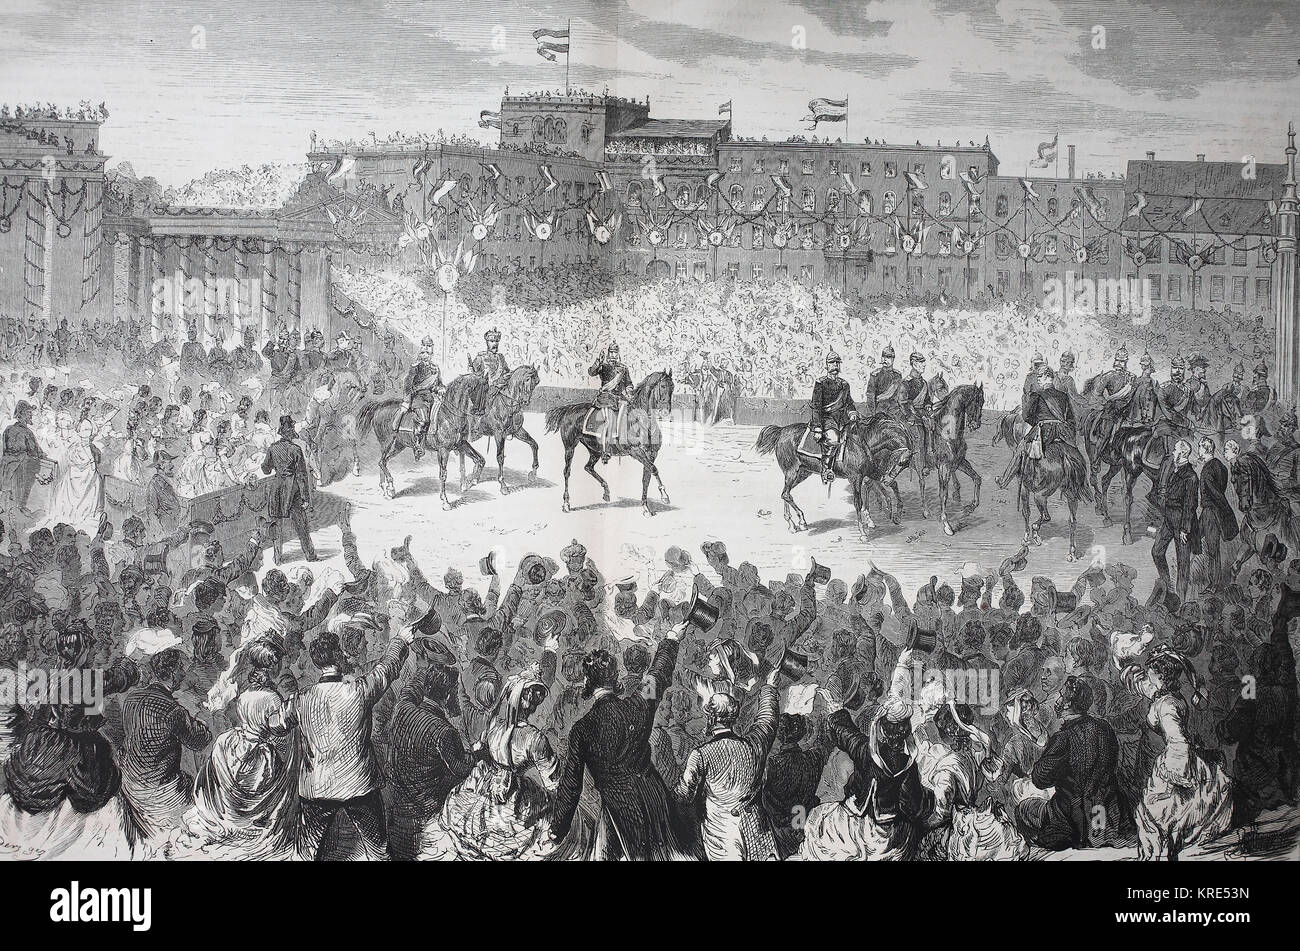 The triumphal procession of the Emperor and his troops through the Brandenburg Gate in Berlin on June 16, 1871, Franco-Prussian War, digital improved  Stock Photo